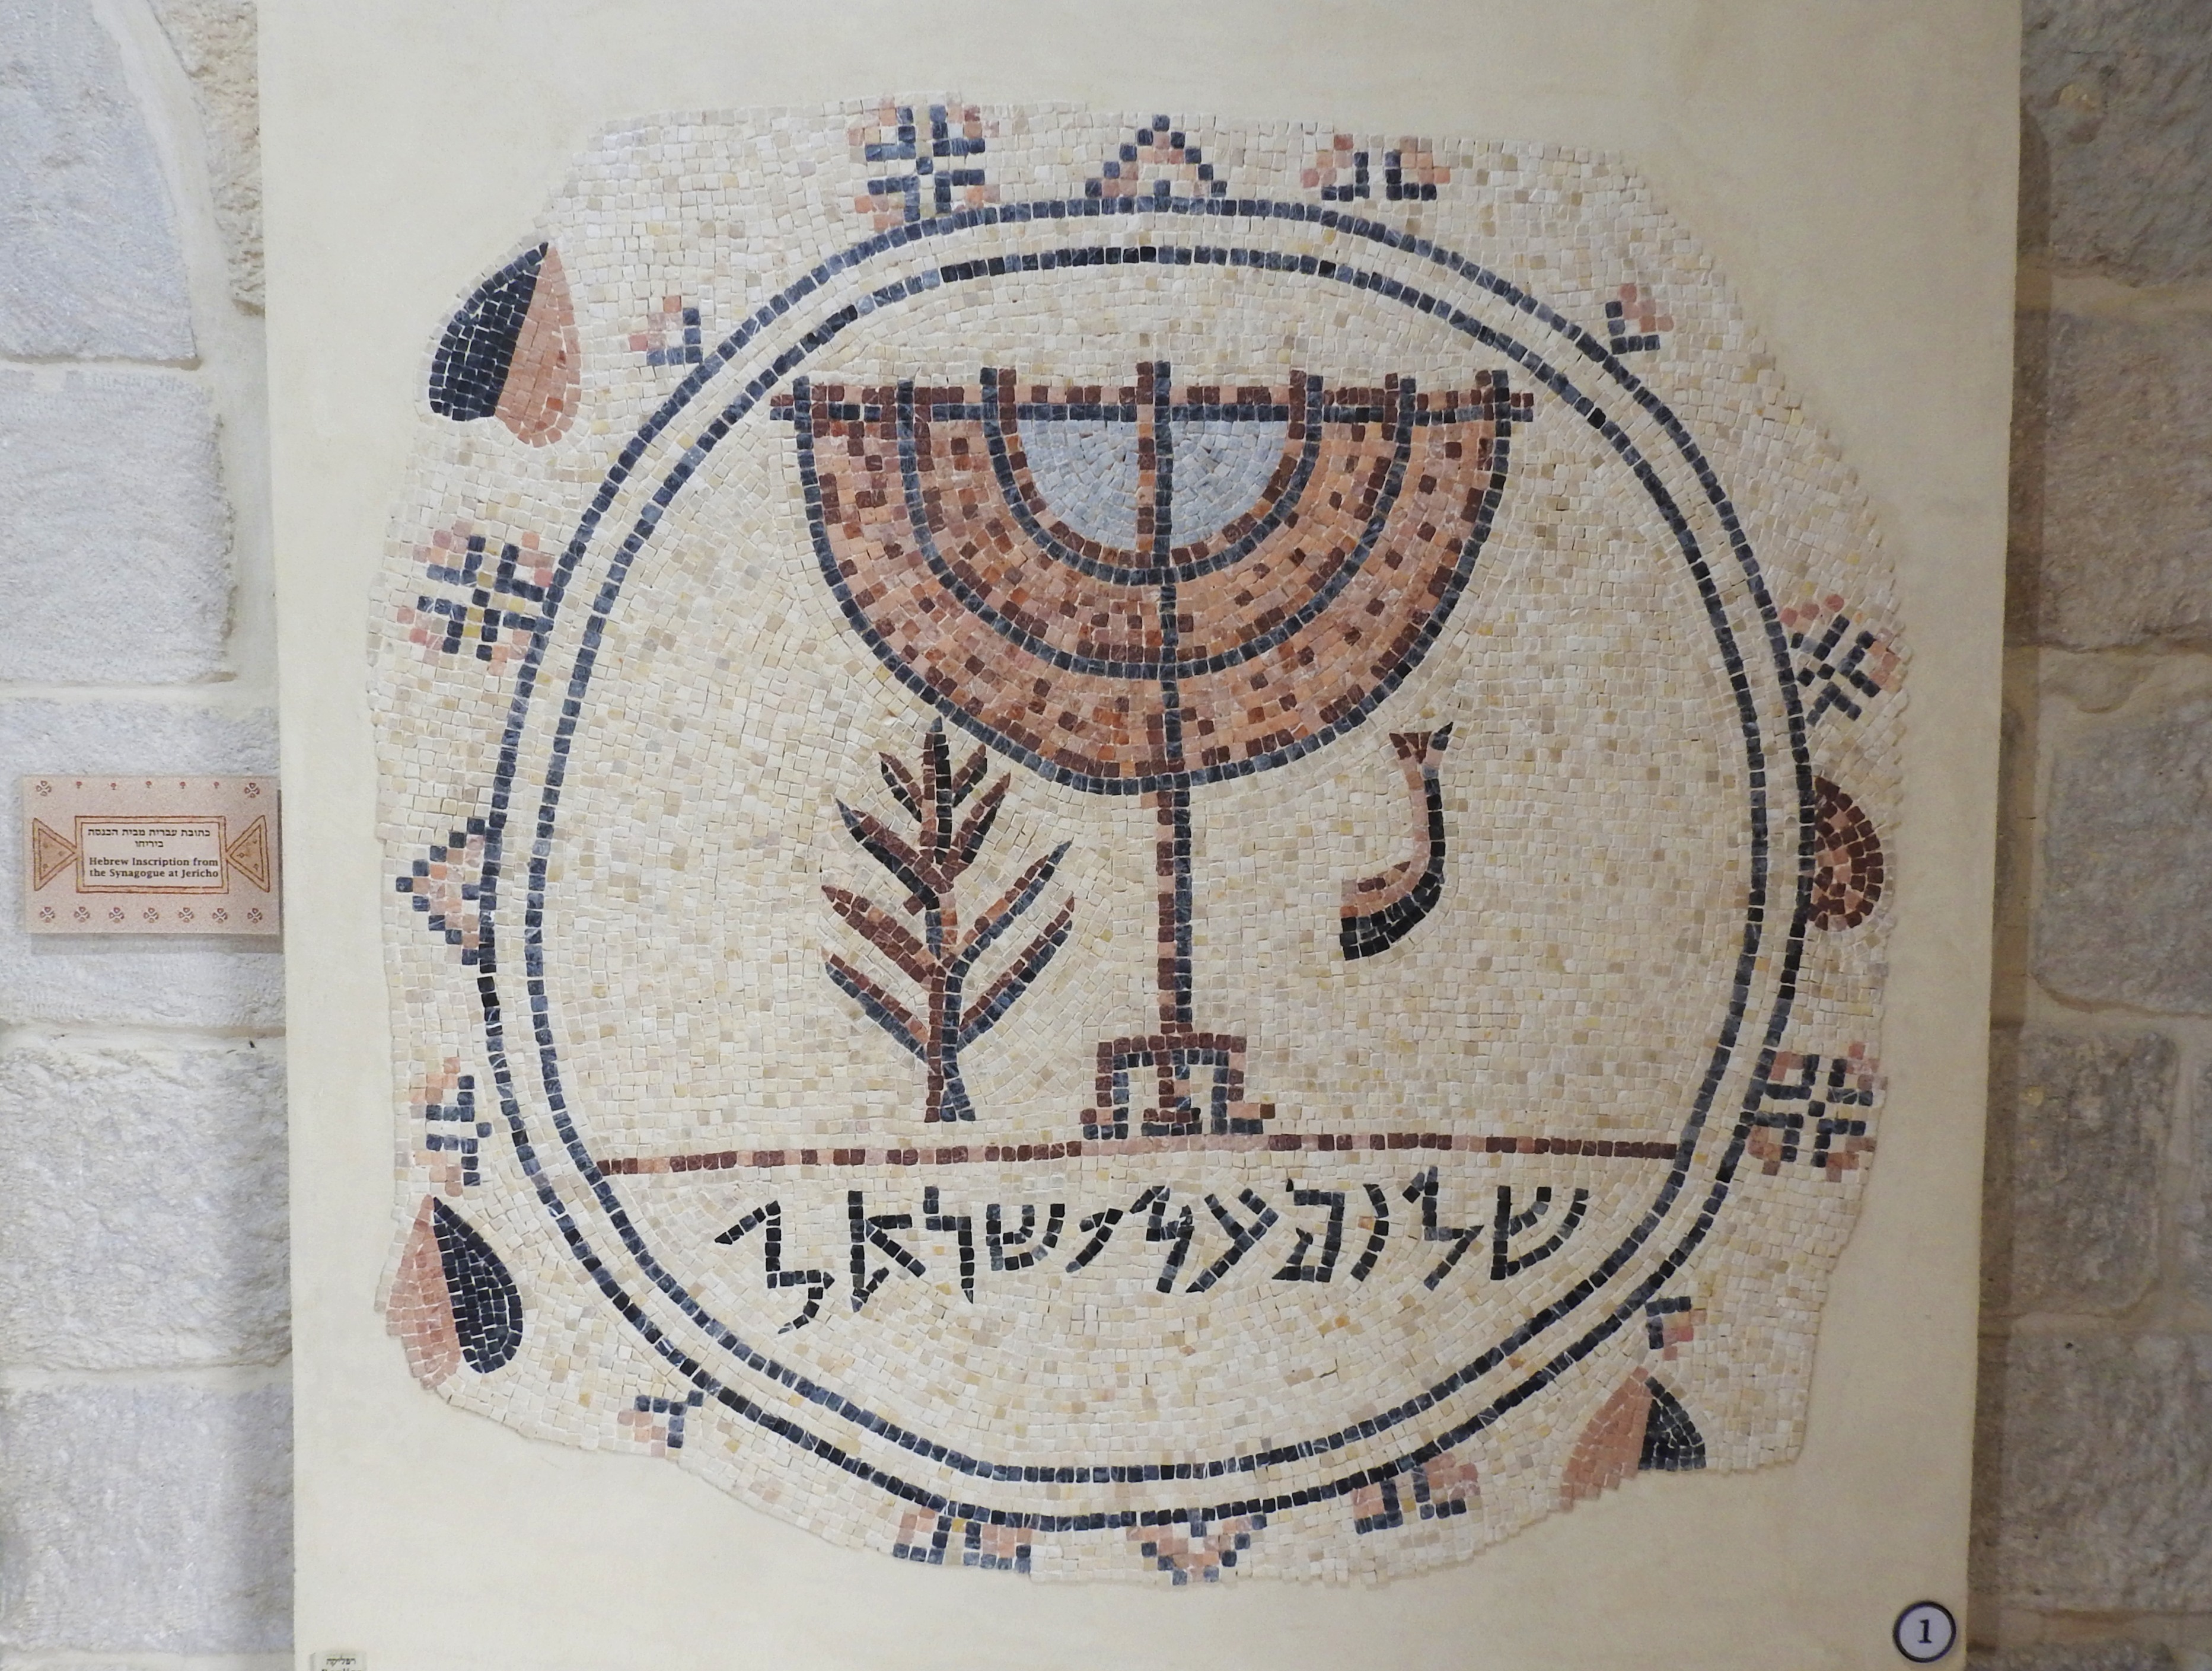 The eponymous mosaic from the Shalom Al Yisrael synagogue of Jericho